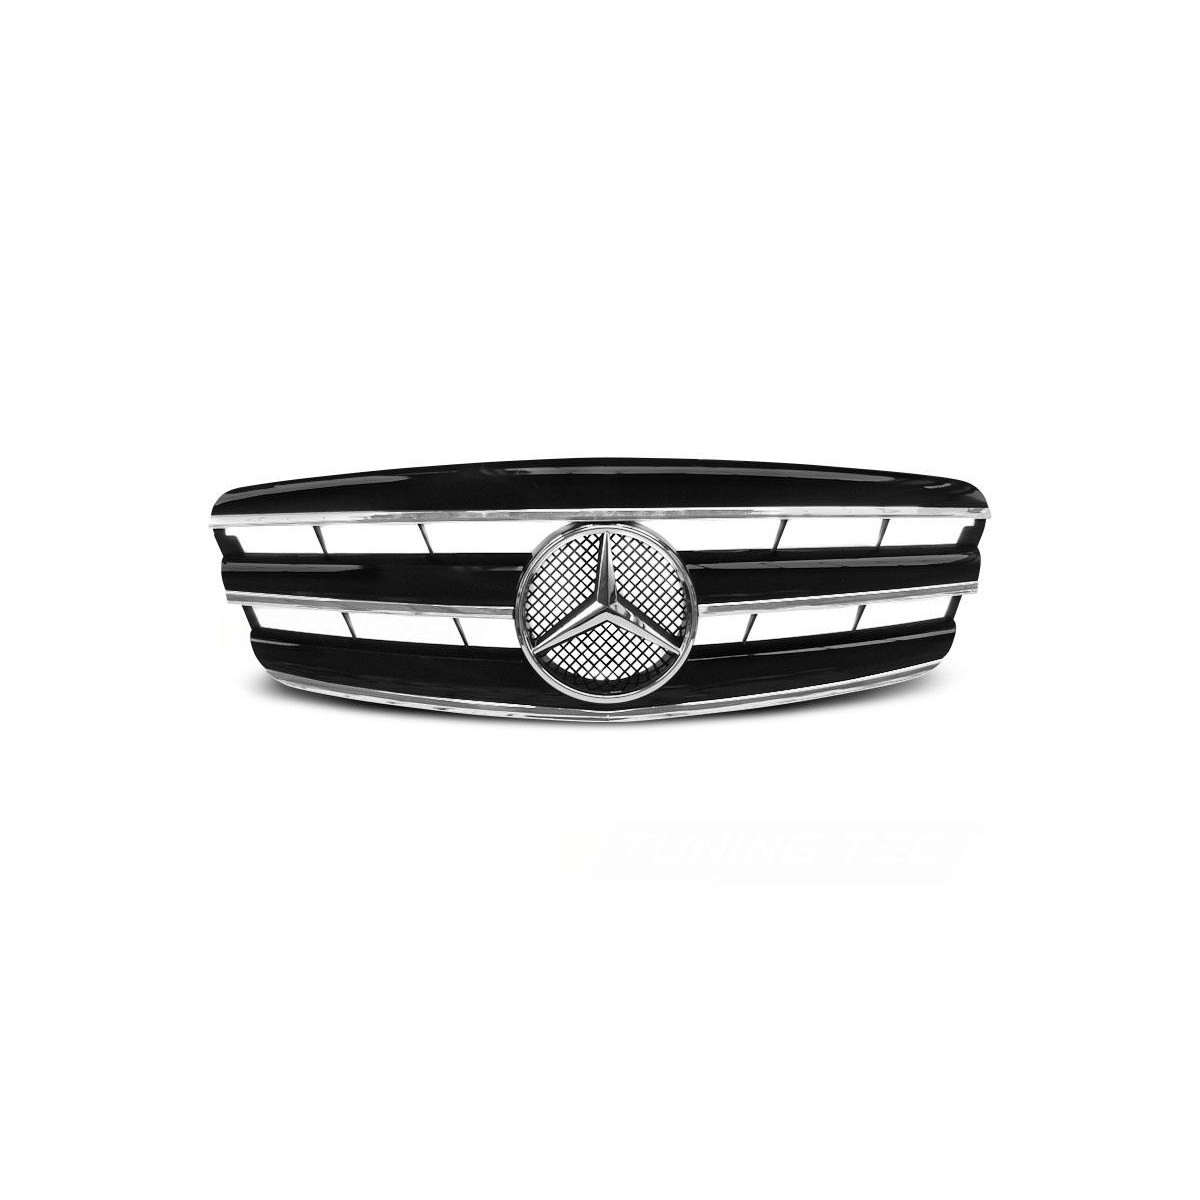 GRILL MERCEDES W221 05-09 CL STYLE BLACK CHROME